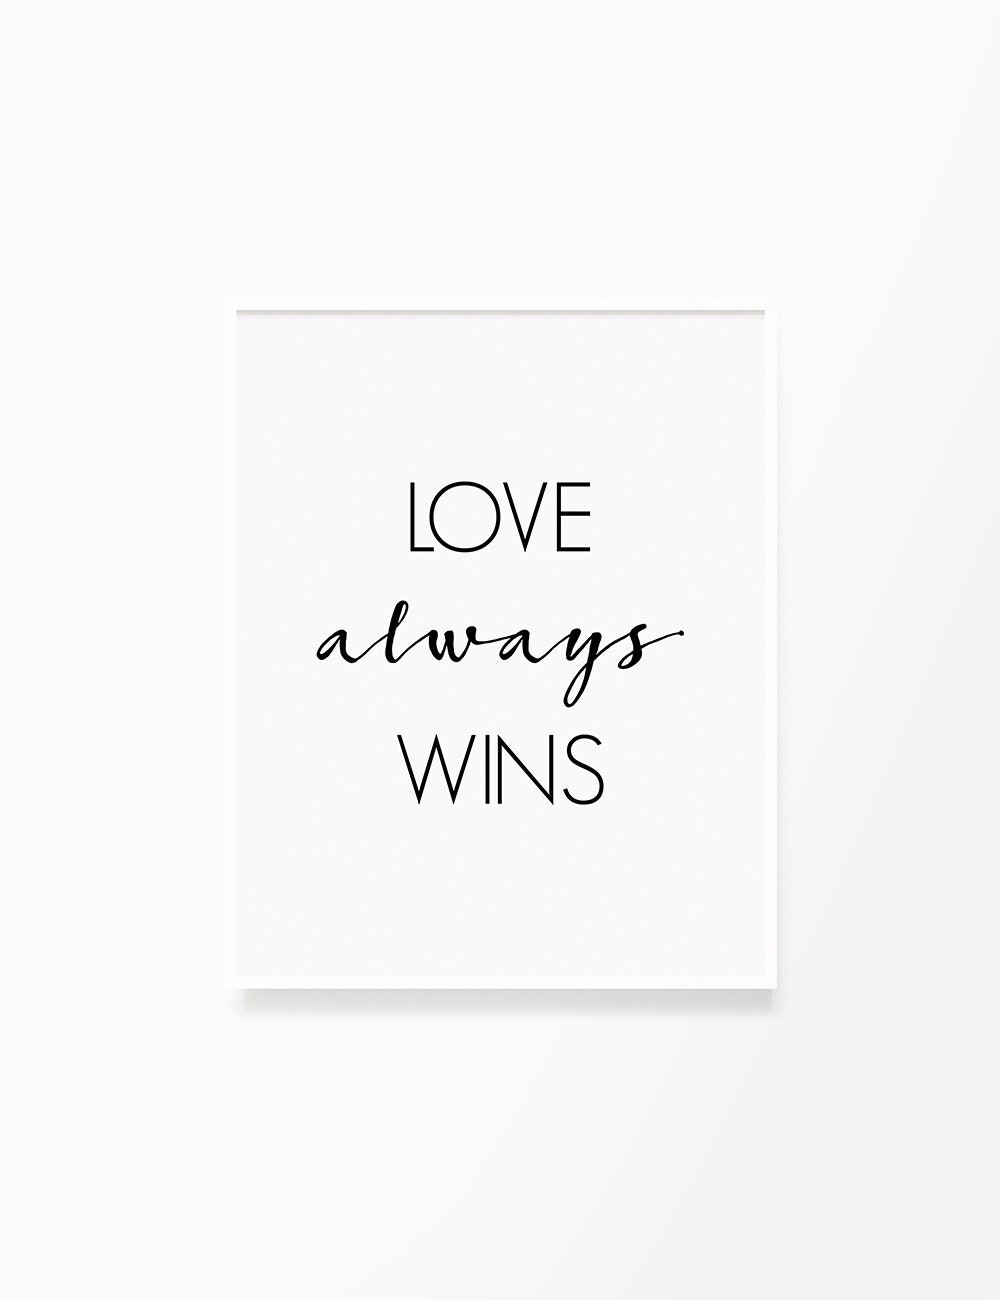 Love Always Wins, Printable Wall Art, Love Quote, Love Typography Poster,  Motivational, Inspirational, Clean, Minimalist, Elegant Design - Etsy